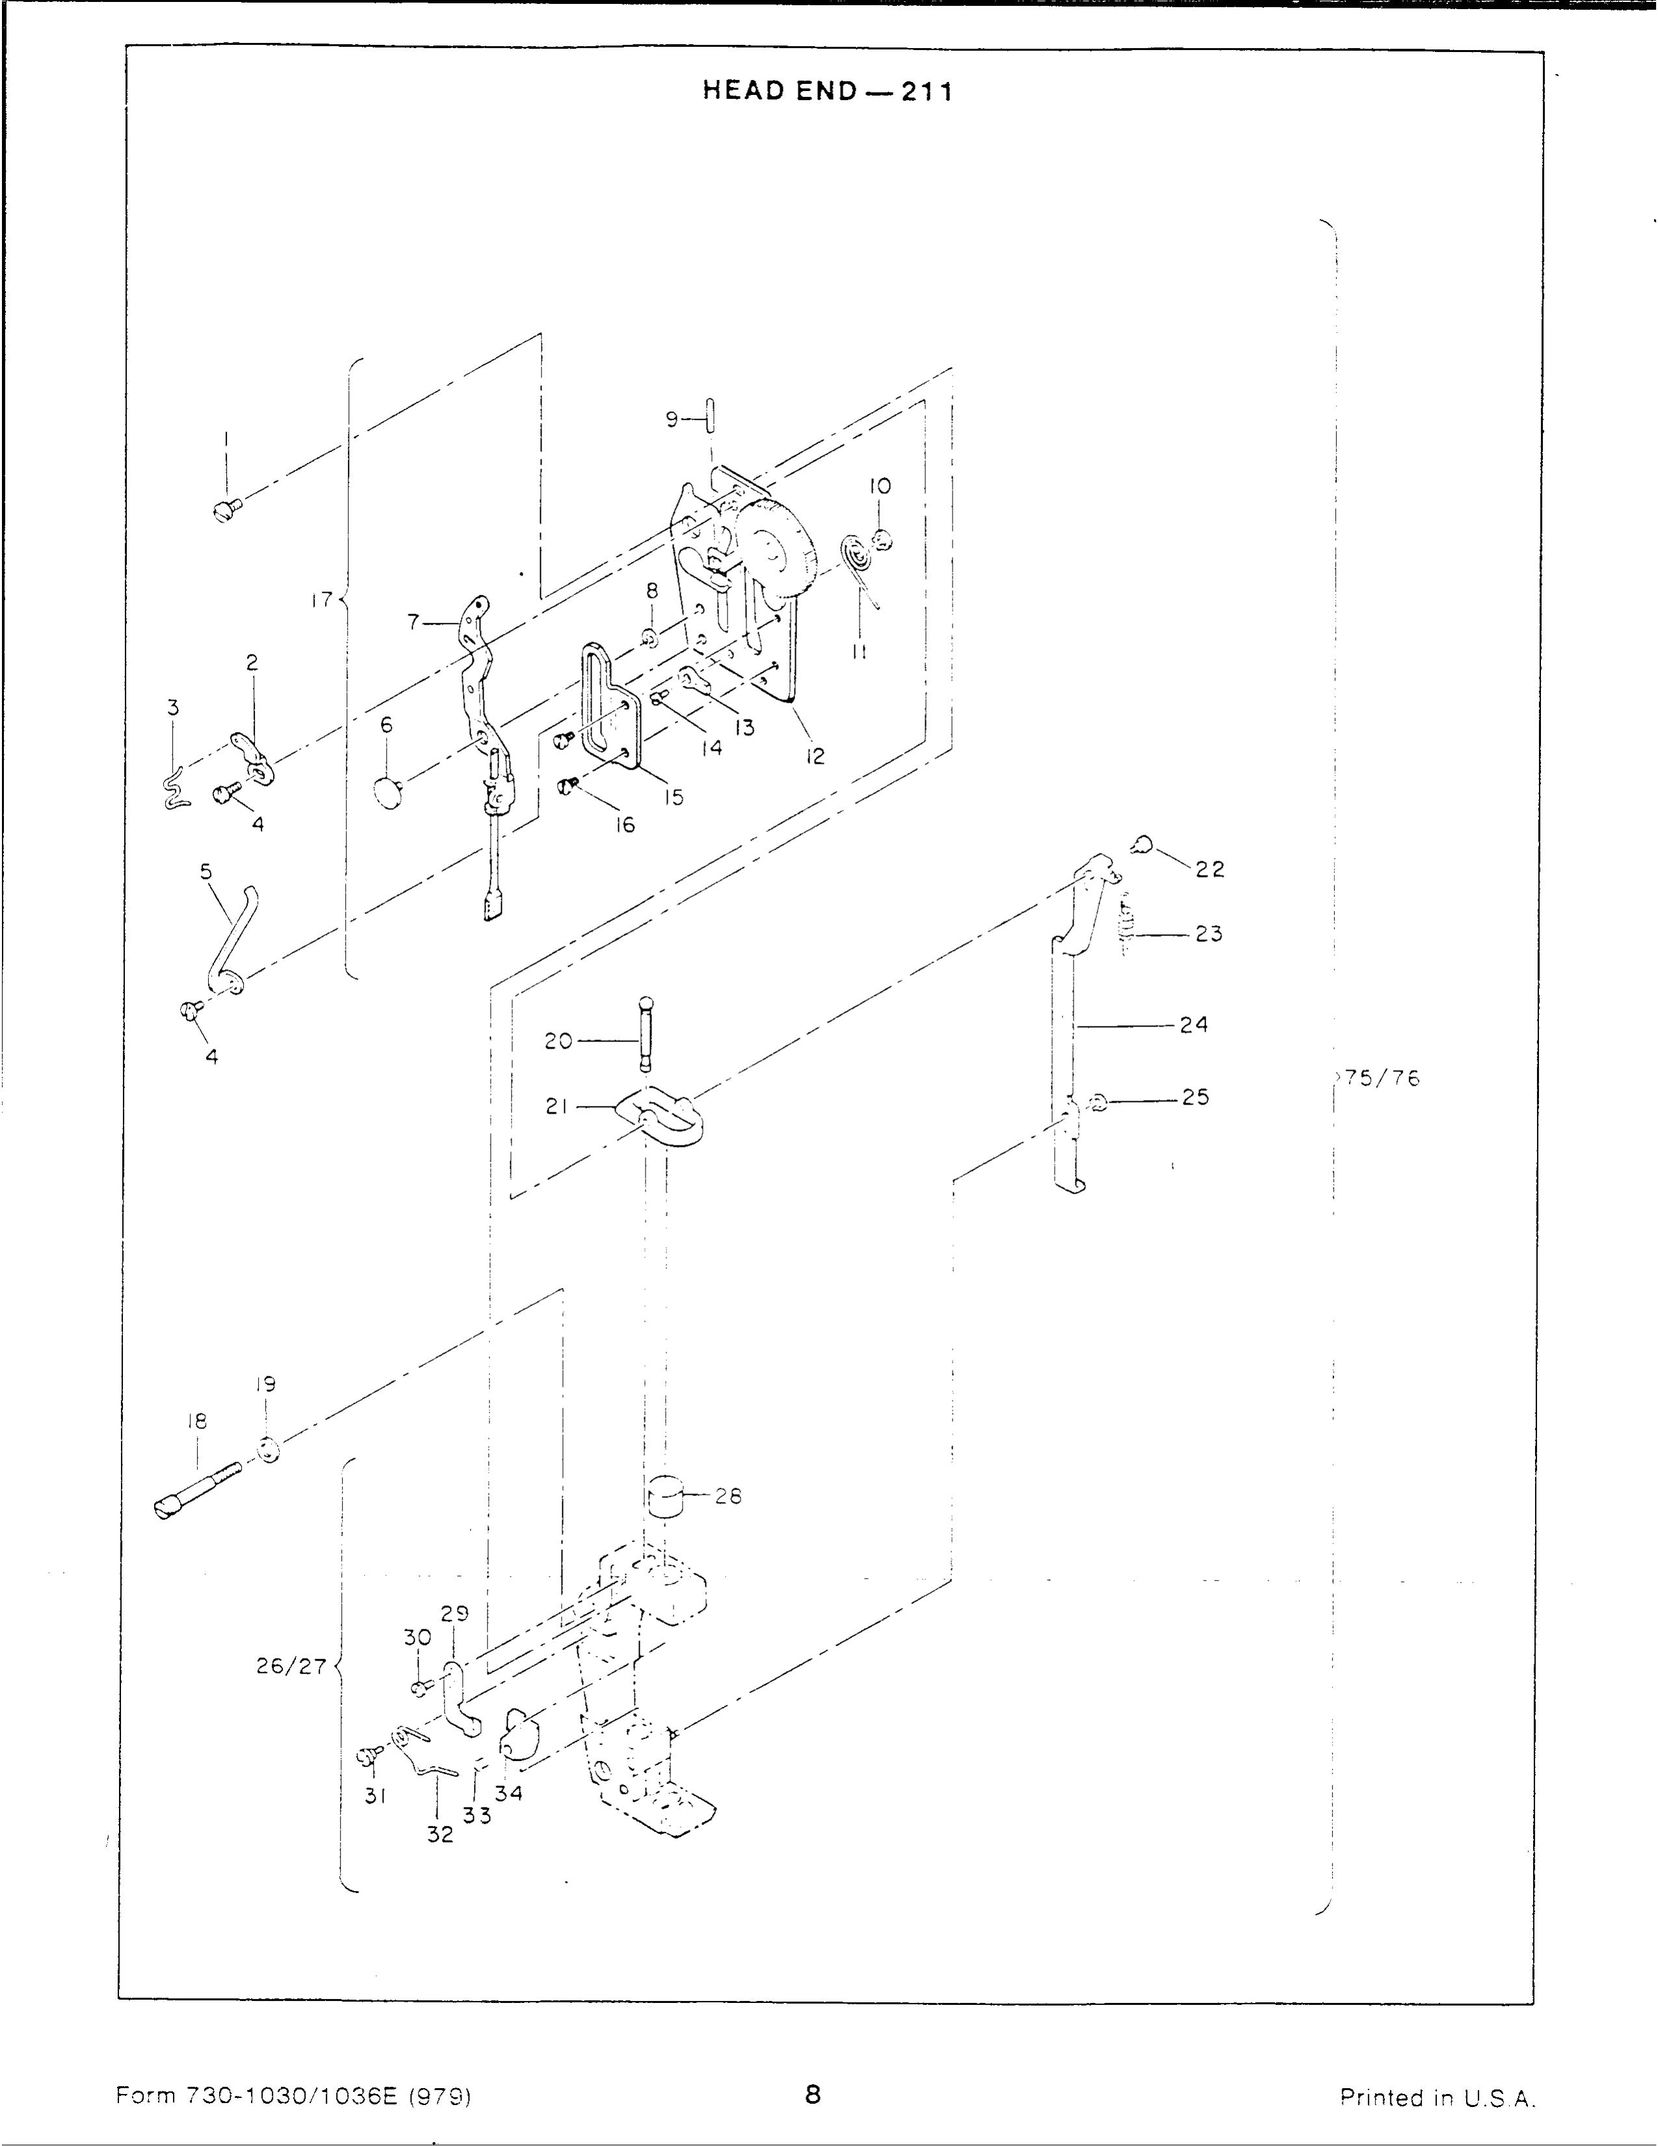 Singer 1036E Sewing Machine User Manual (Page 8)